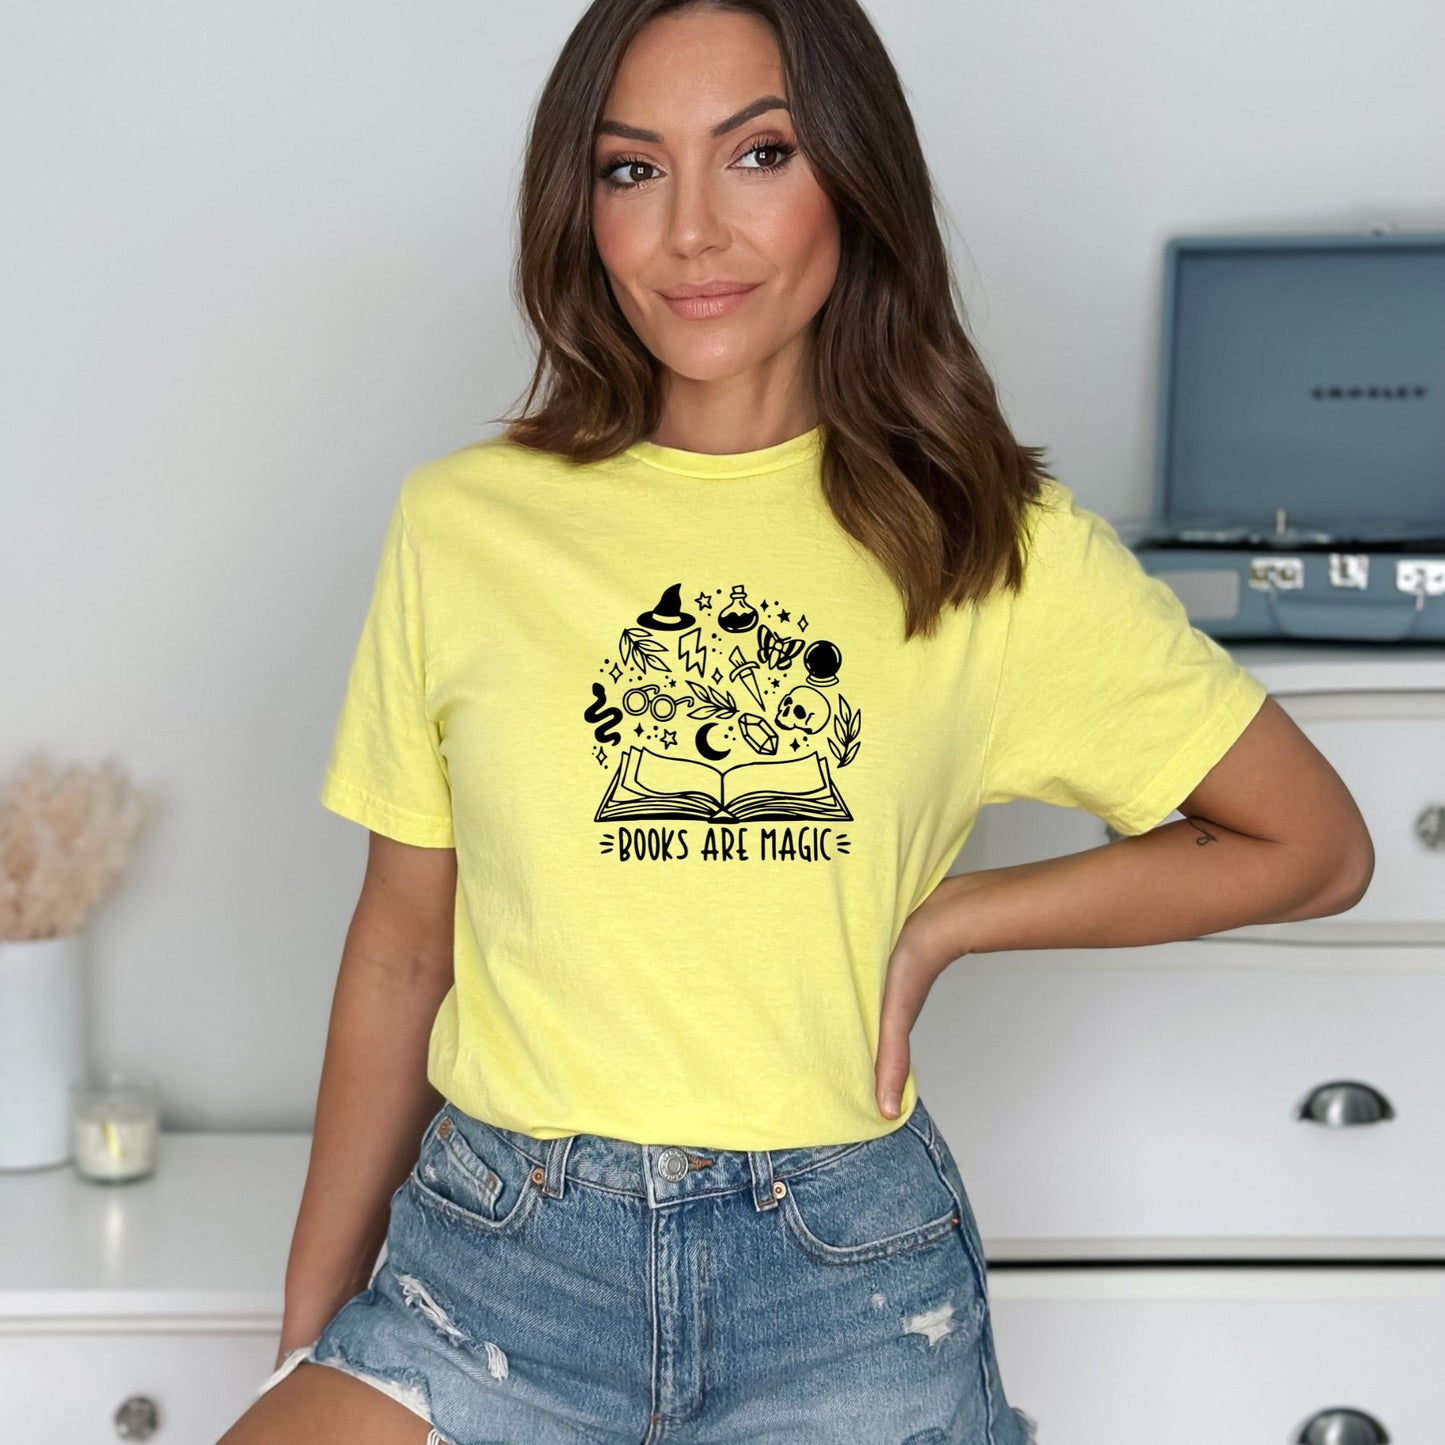 Books are Magic - Adult Soft-style T-shirt